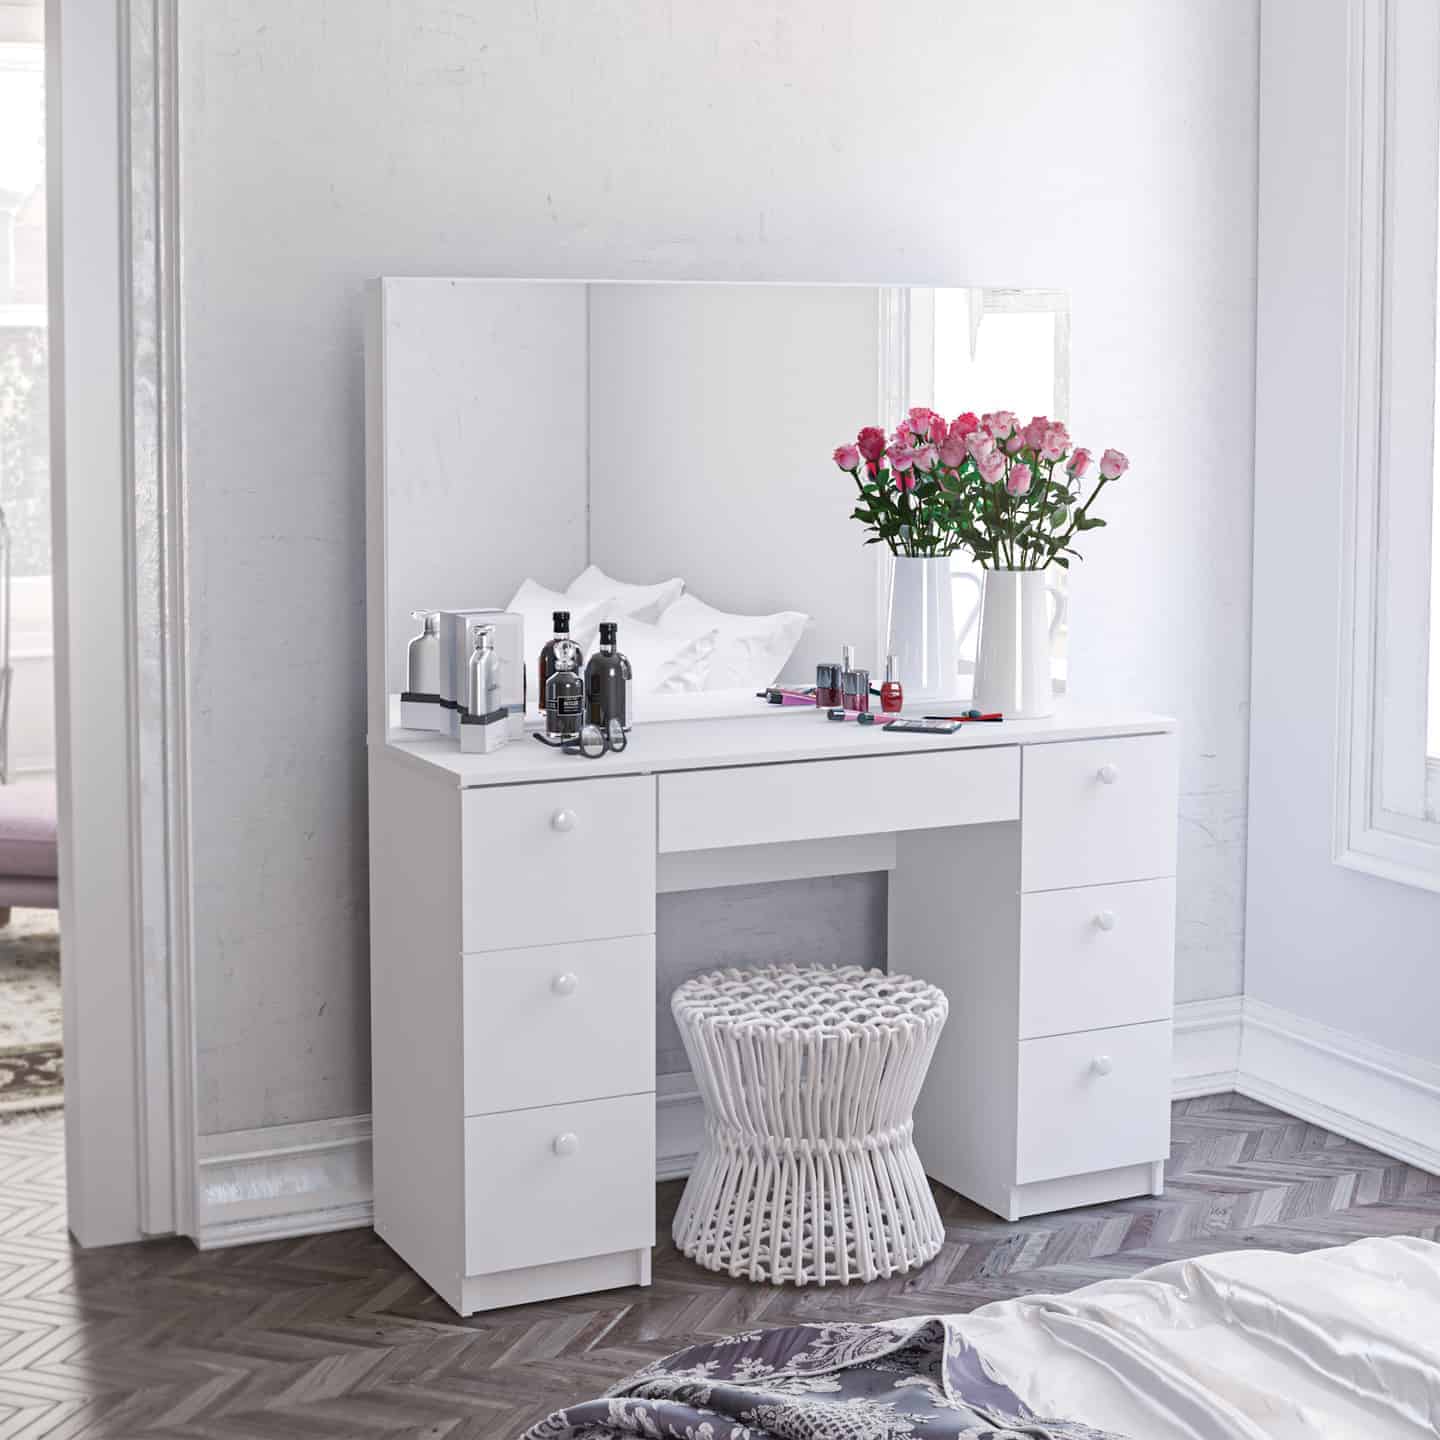 A elegant dressing table design with a big mirror, lots of storage space, and a matching stool, in a white room.